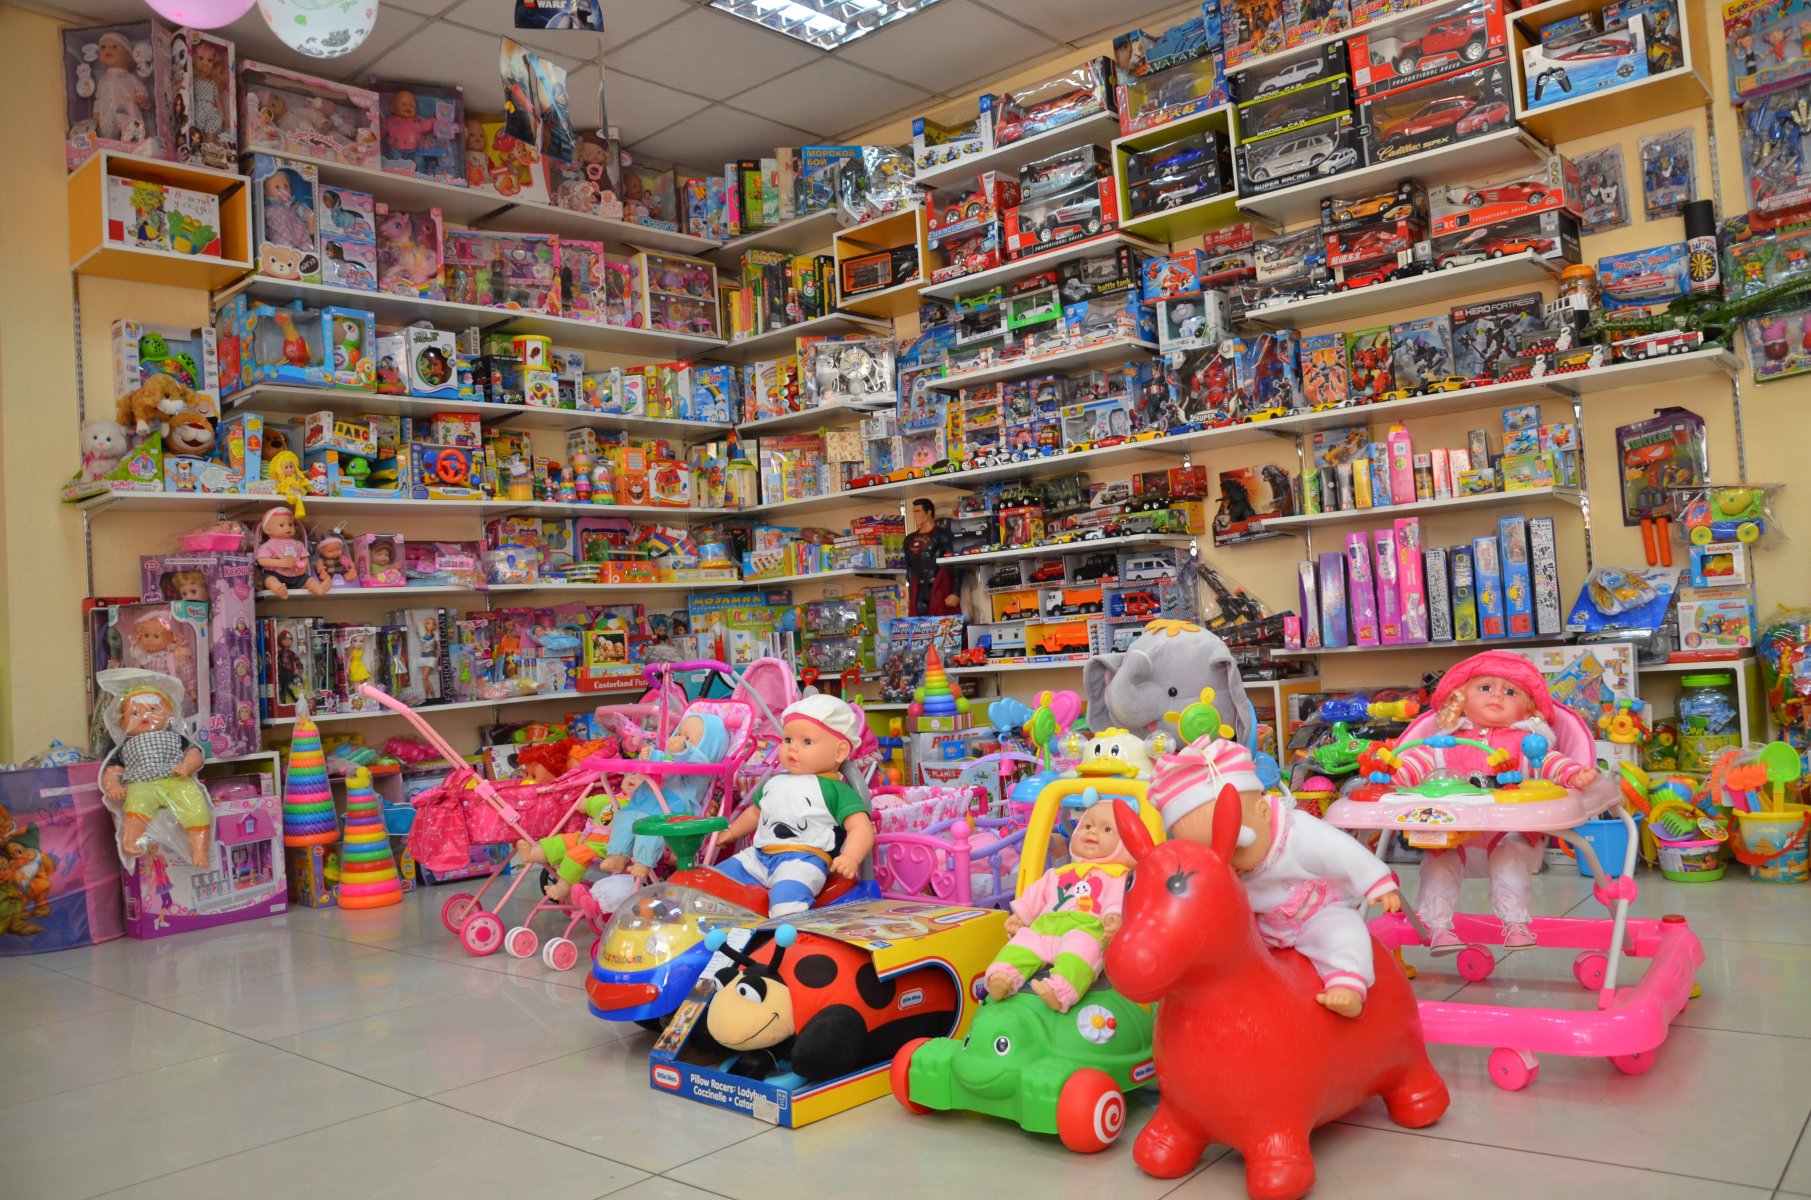 Exciting shopping at Toy Boat